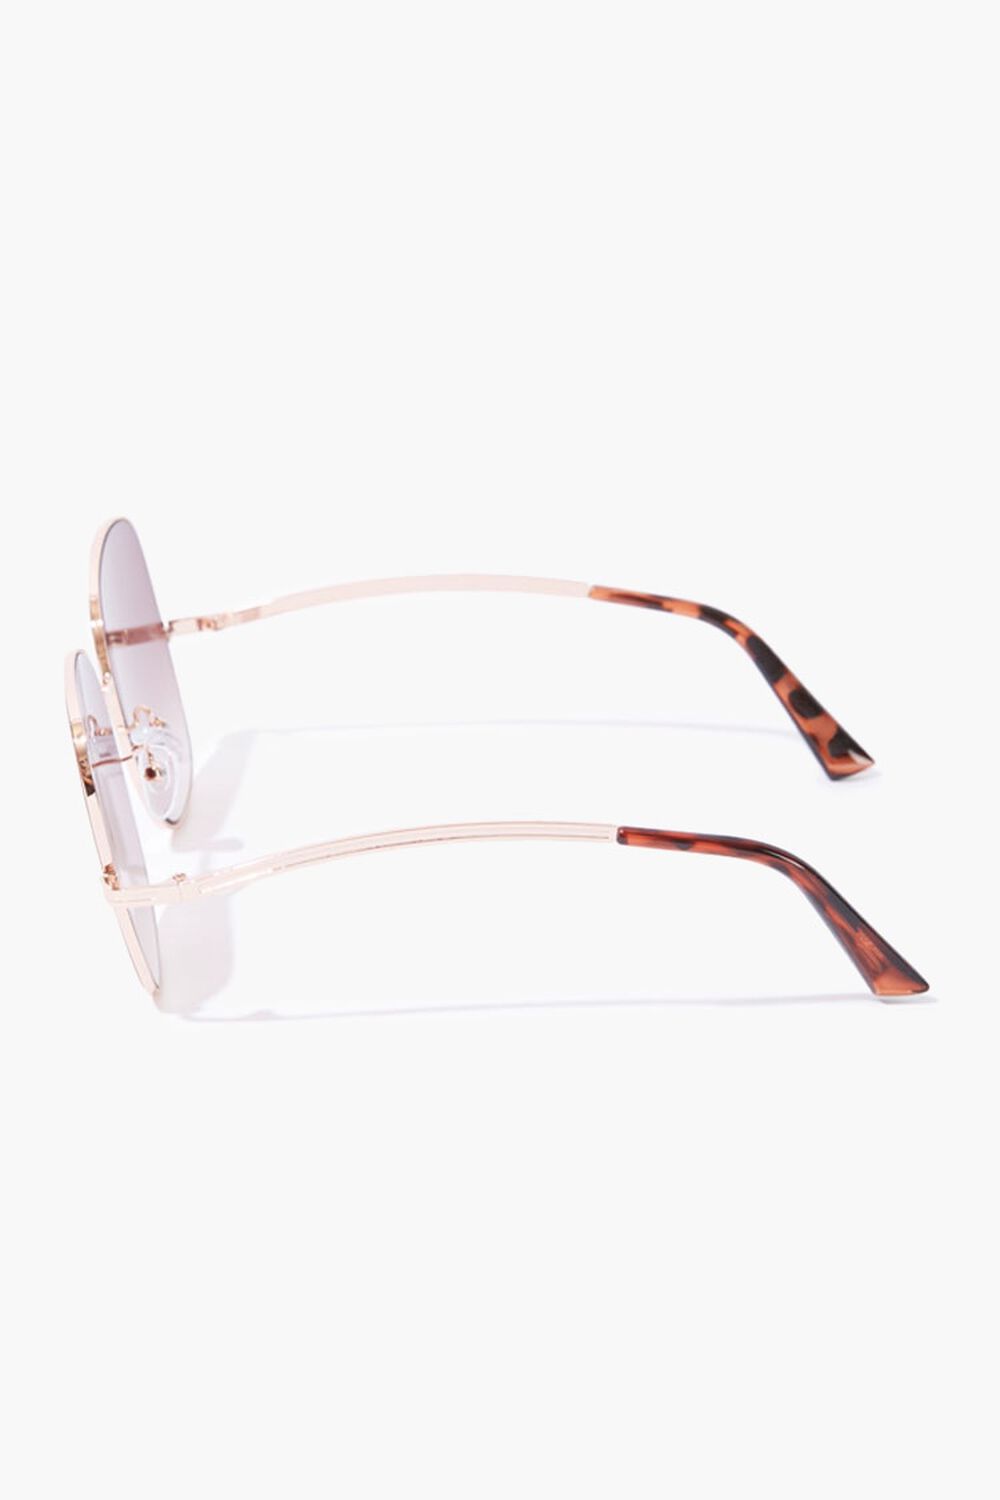 ROSE GOLD/BROWN Square Tinted Sunglasses, image 2